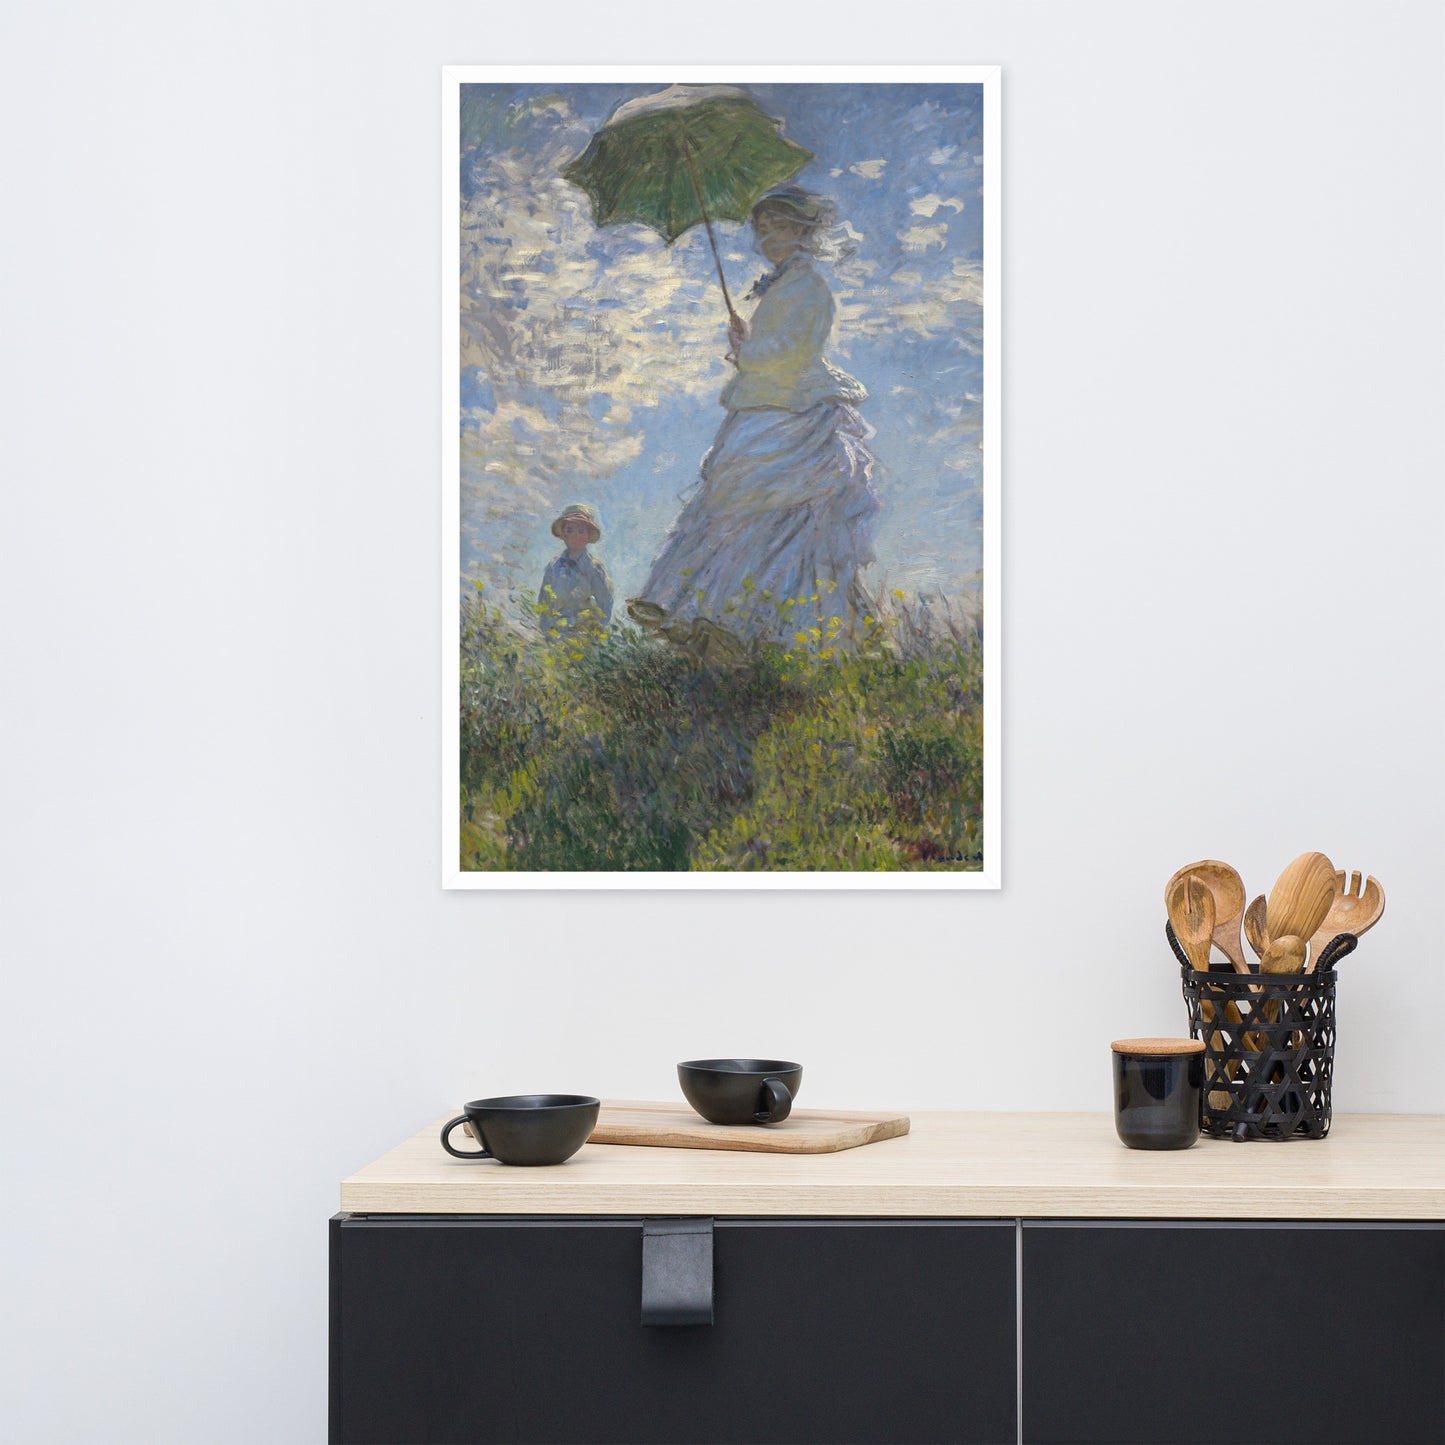 Framed photo paper poster / Claude Monet / Women with a Parasol / Gift home decor